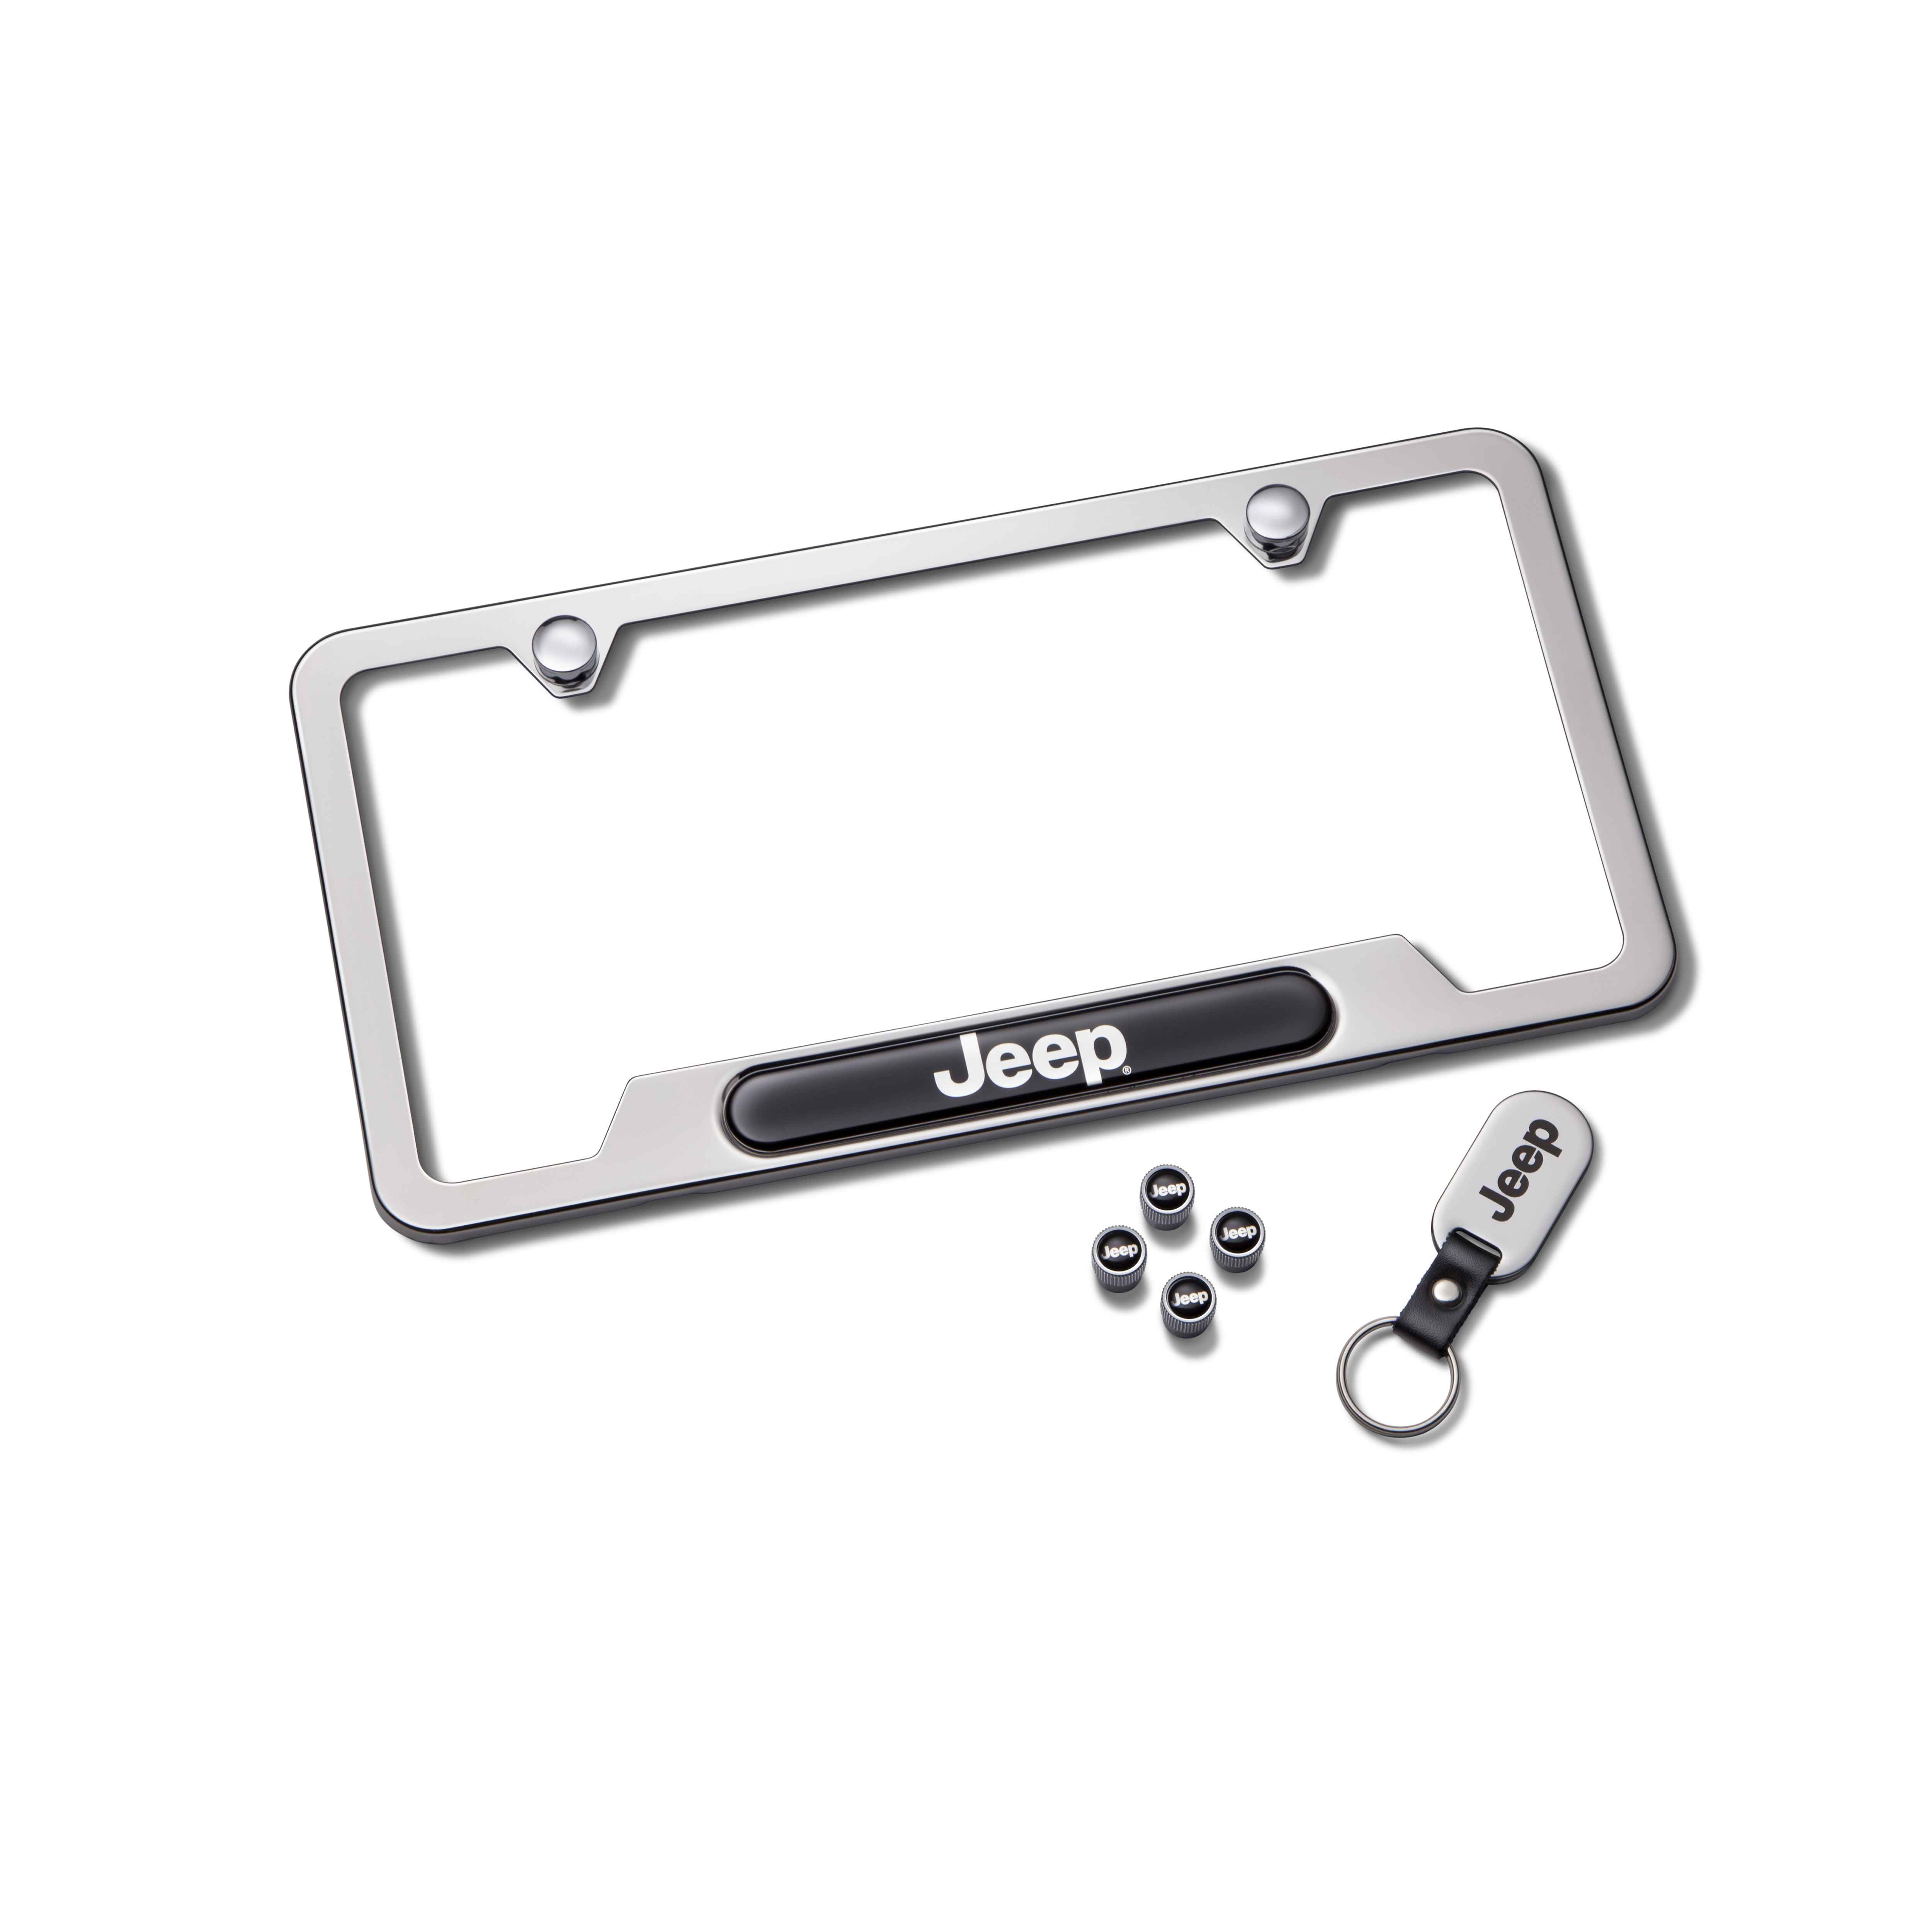 2020 Jeep Grand Cherokee License Plate Frame Gift Set 82215852